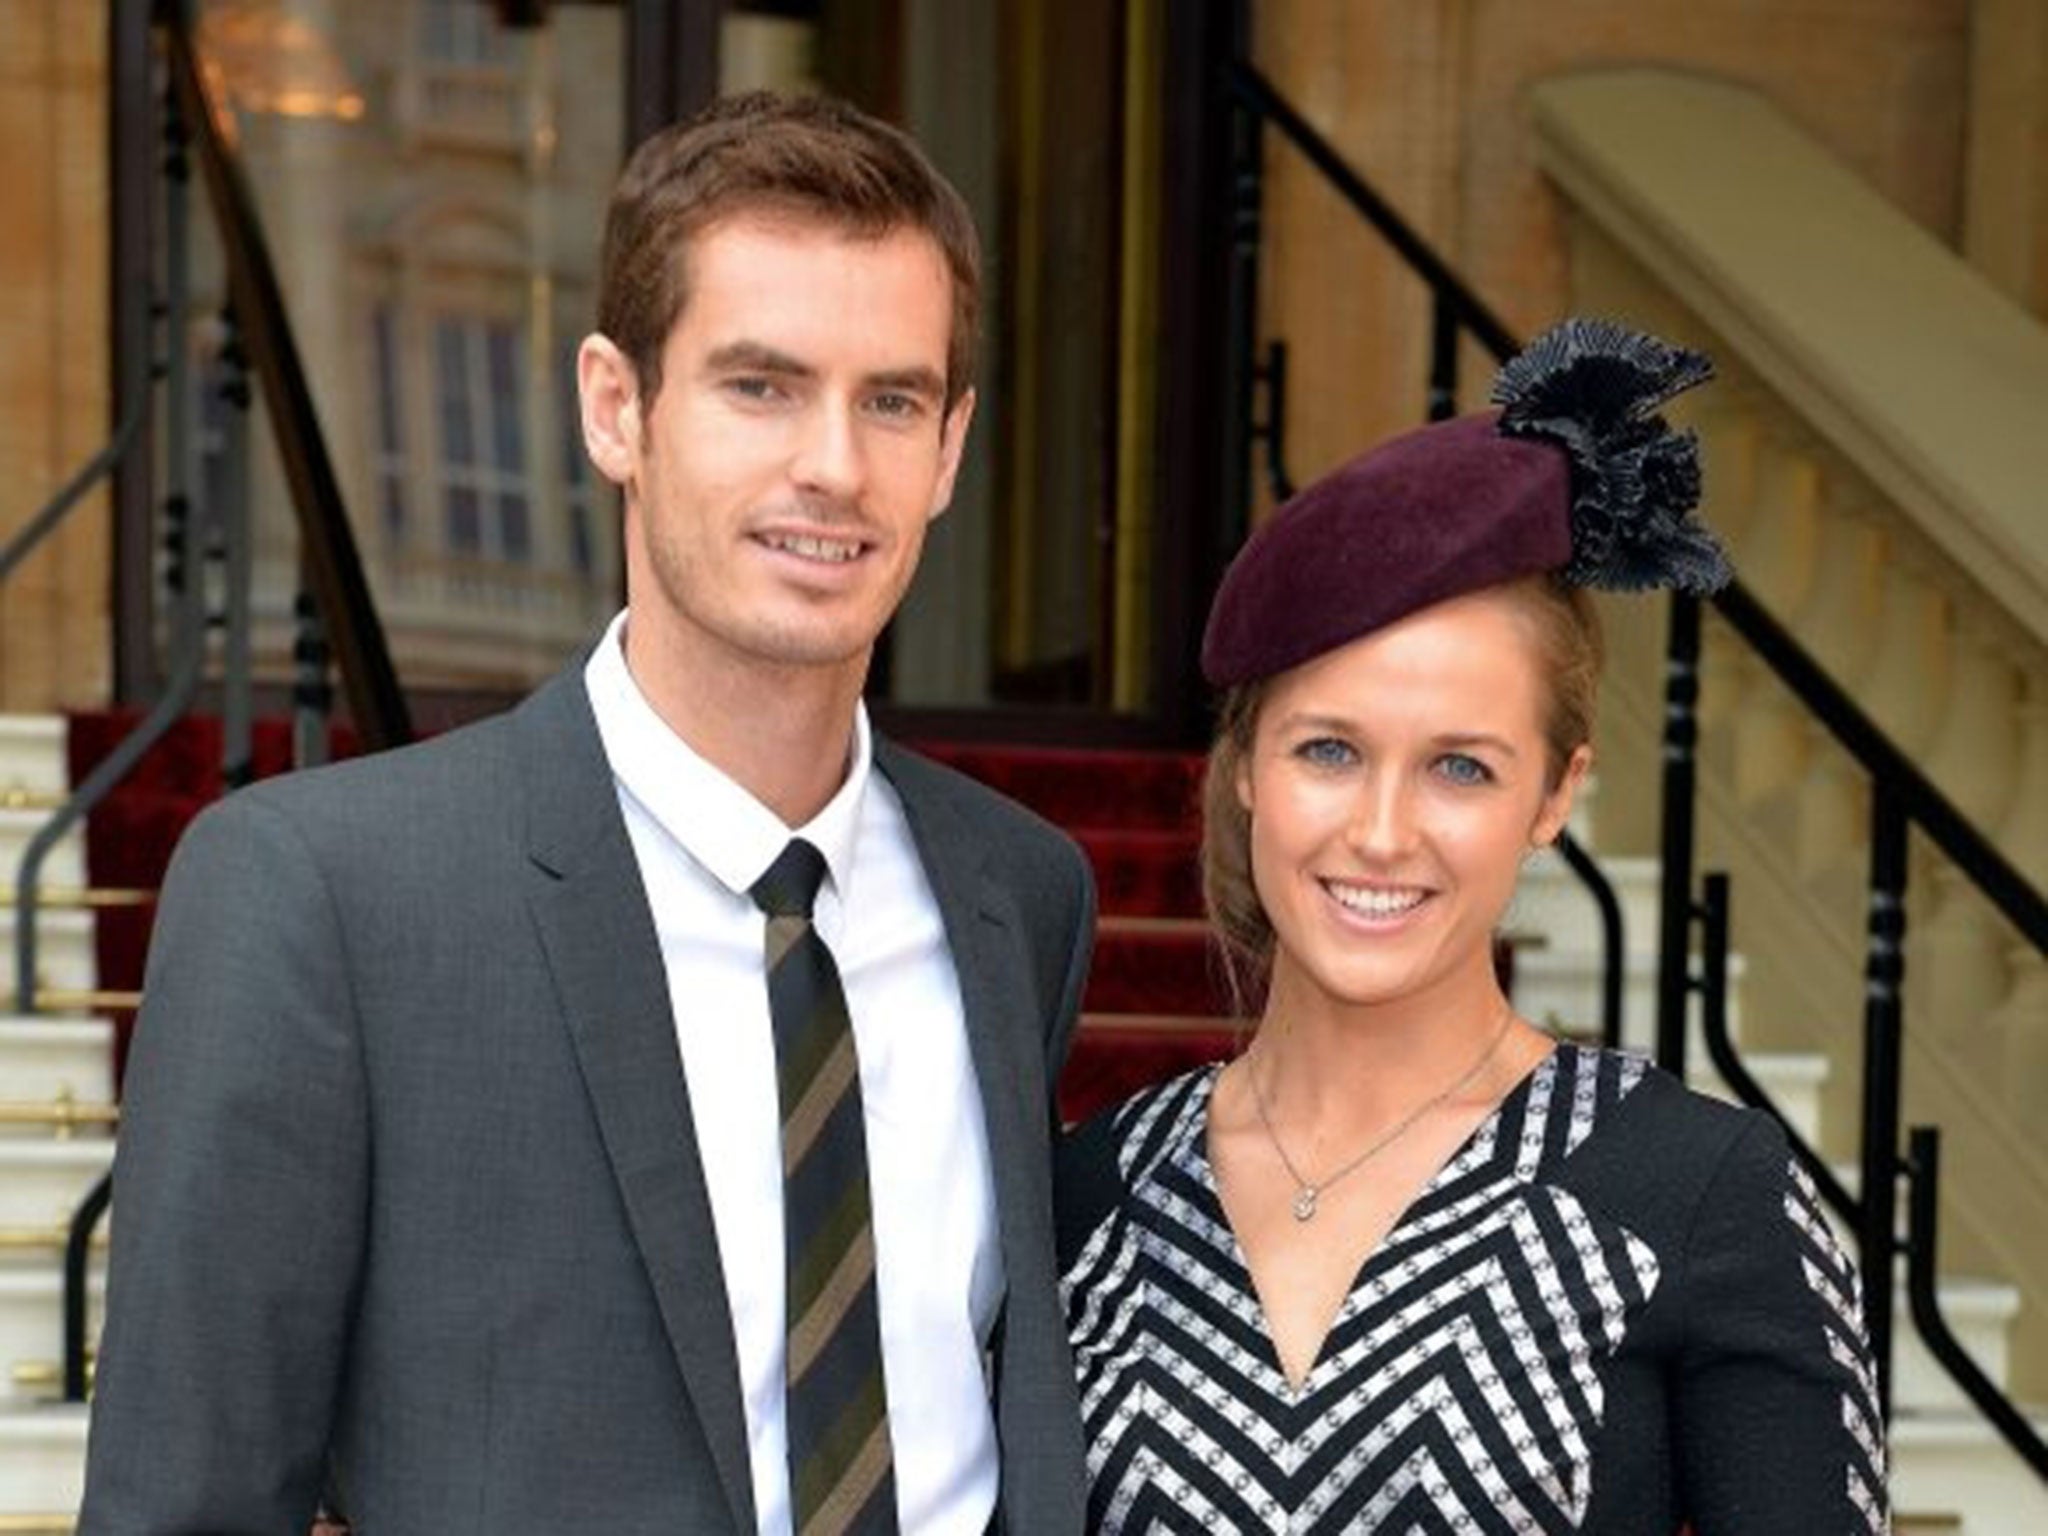 Andy Murray with his girlfriend of nine years, Kim Sears who he has got engaged to